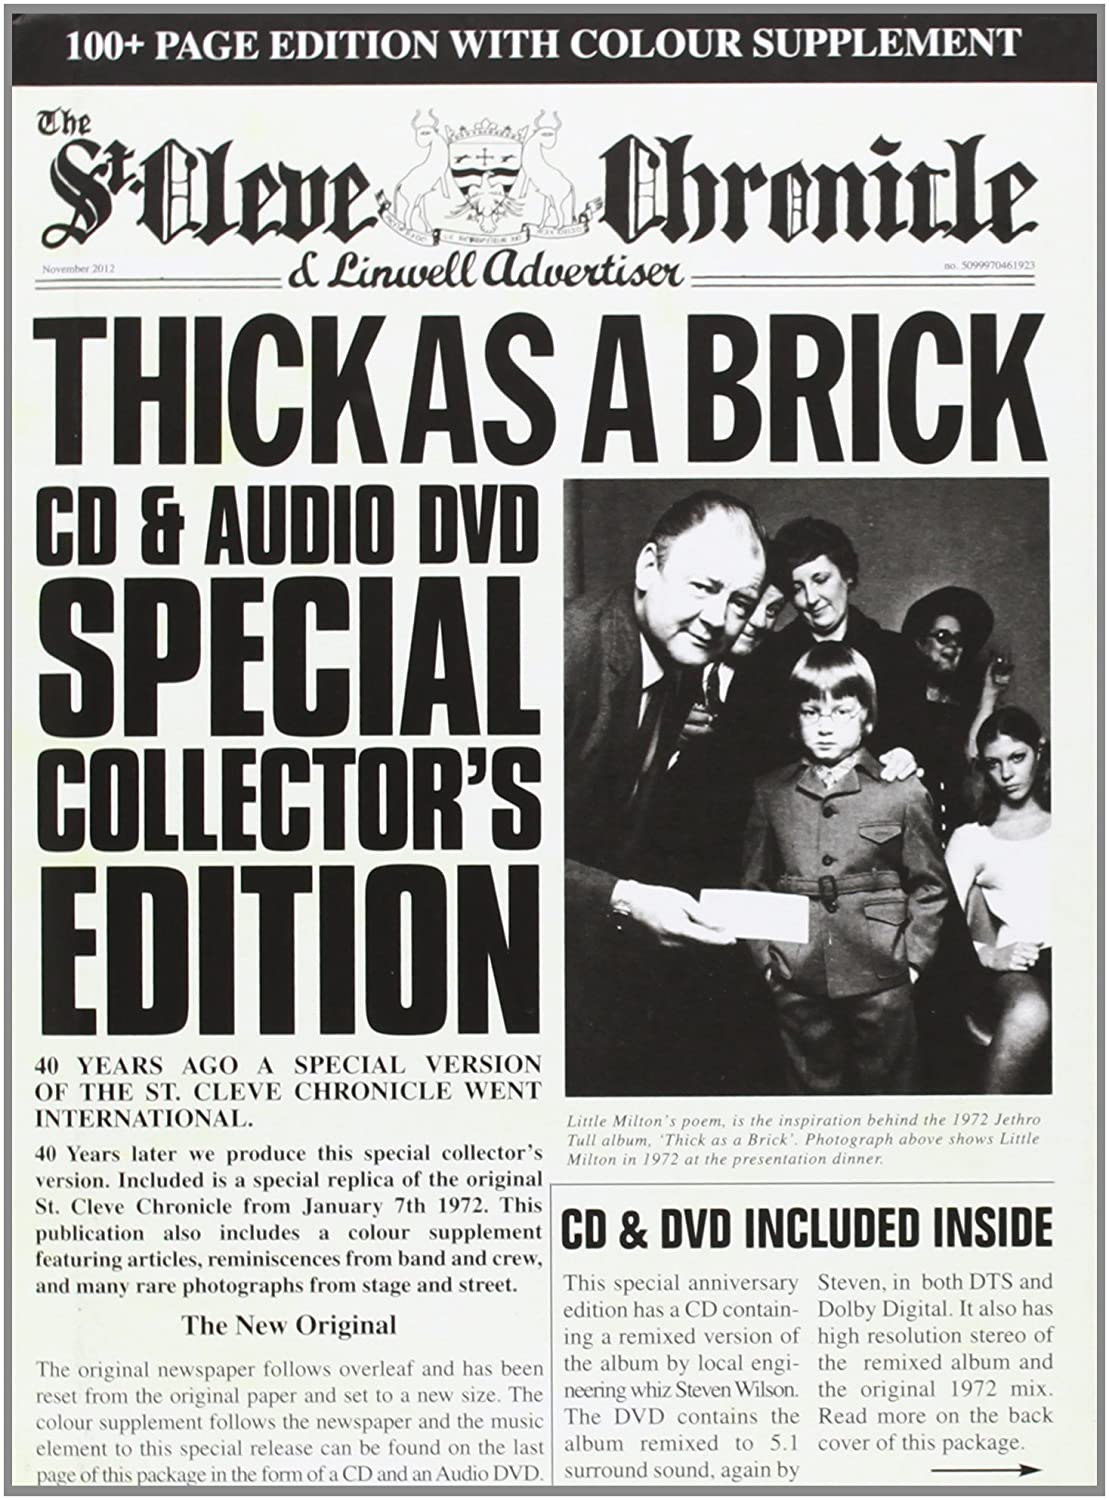 JETHRO TULL - Thick As a Brick (40th anniversary set CD+DVD Audio special collector's ed.)